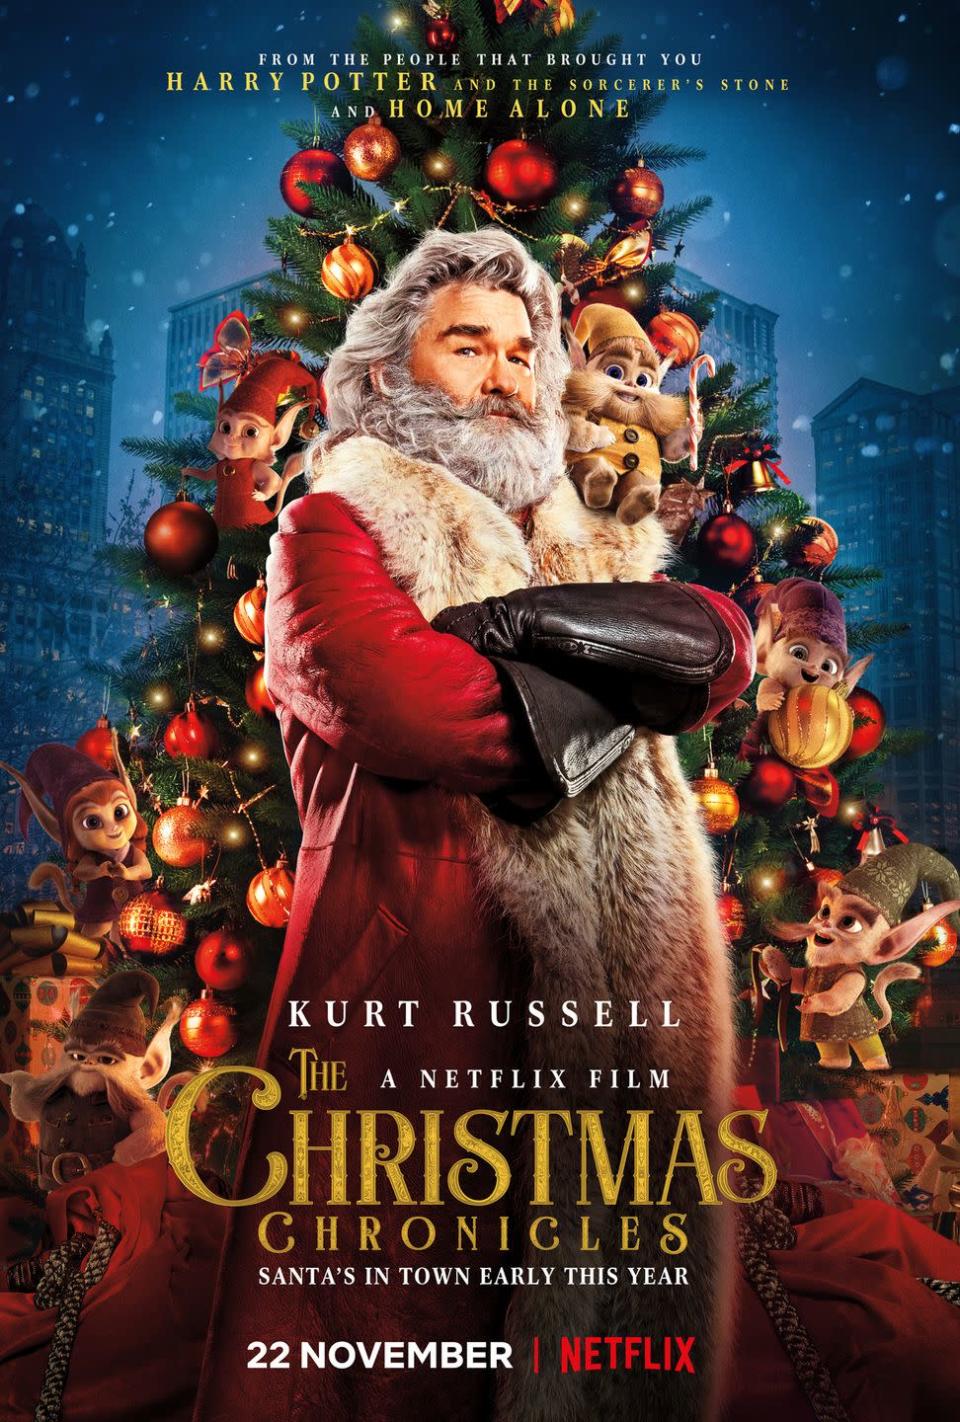 <p>Starring Kurt Russell as Santa Claus, this jolly Netflix original film follows two kids who encounter Santa in their own home — and find themselves on a magical adventure to help him save Christmas. If you're a fan, add <em><a href="https://www.netflix.com/title/80988988" rel="nofollow noopener" target="_blank" data-ylk="slk:The Christmas Chronicles: Part Two" class="link rapid-noclick-resp">The Christmas Chronicles: Part Two</a> </em>to your watchlist, as well.</p><p><a class="link rapid-noclick-resp" href="https://www.netflix.com/title/80199682" rel="nofollow noopener" target="_blank" data-ylk="slk:WATCH NOW">WATCH NOW</a> </p>